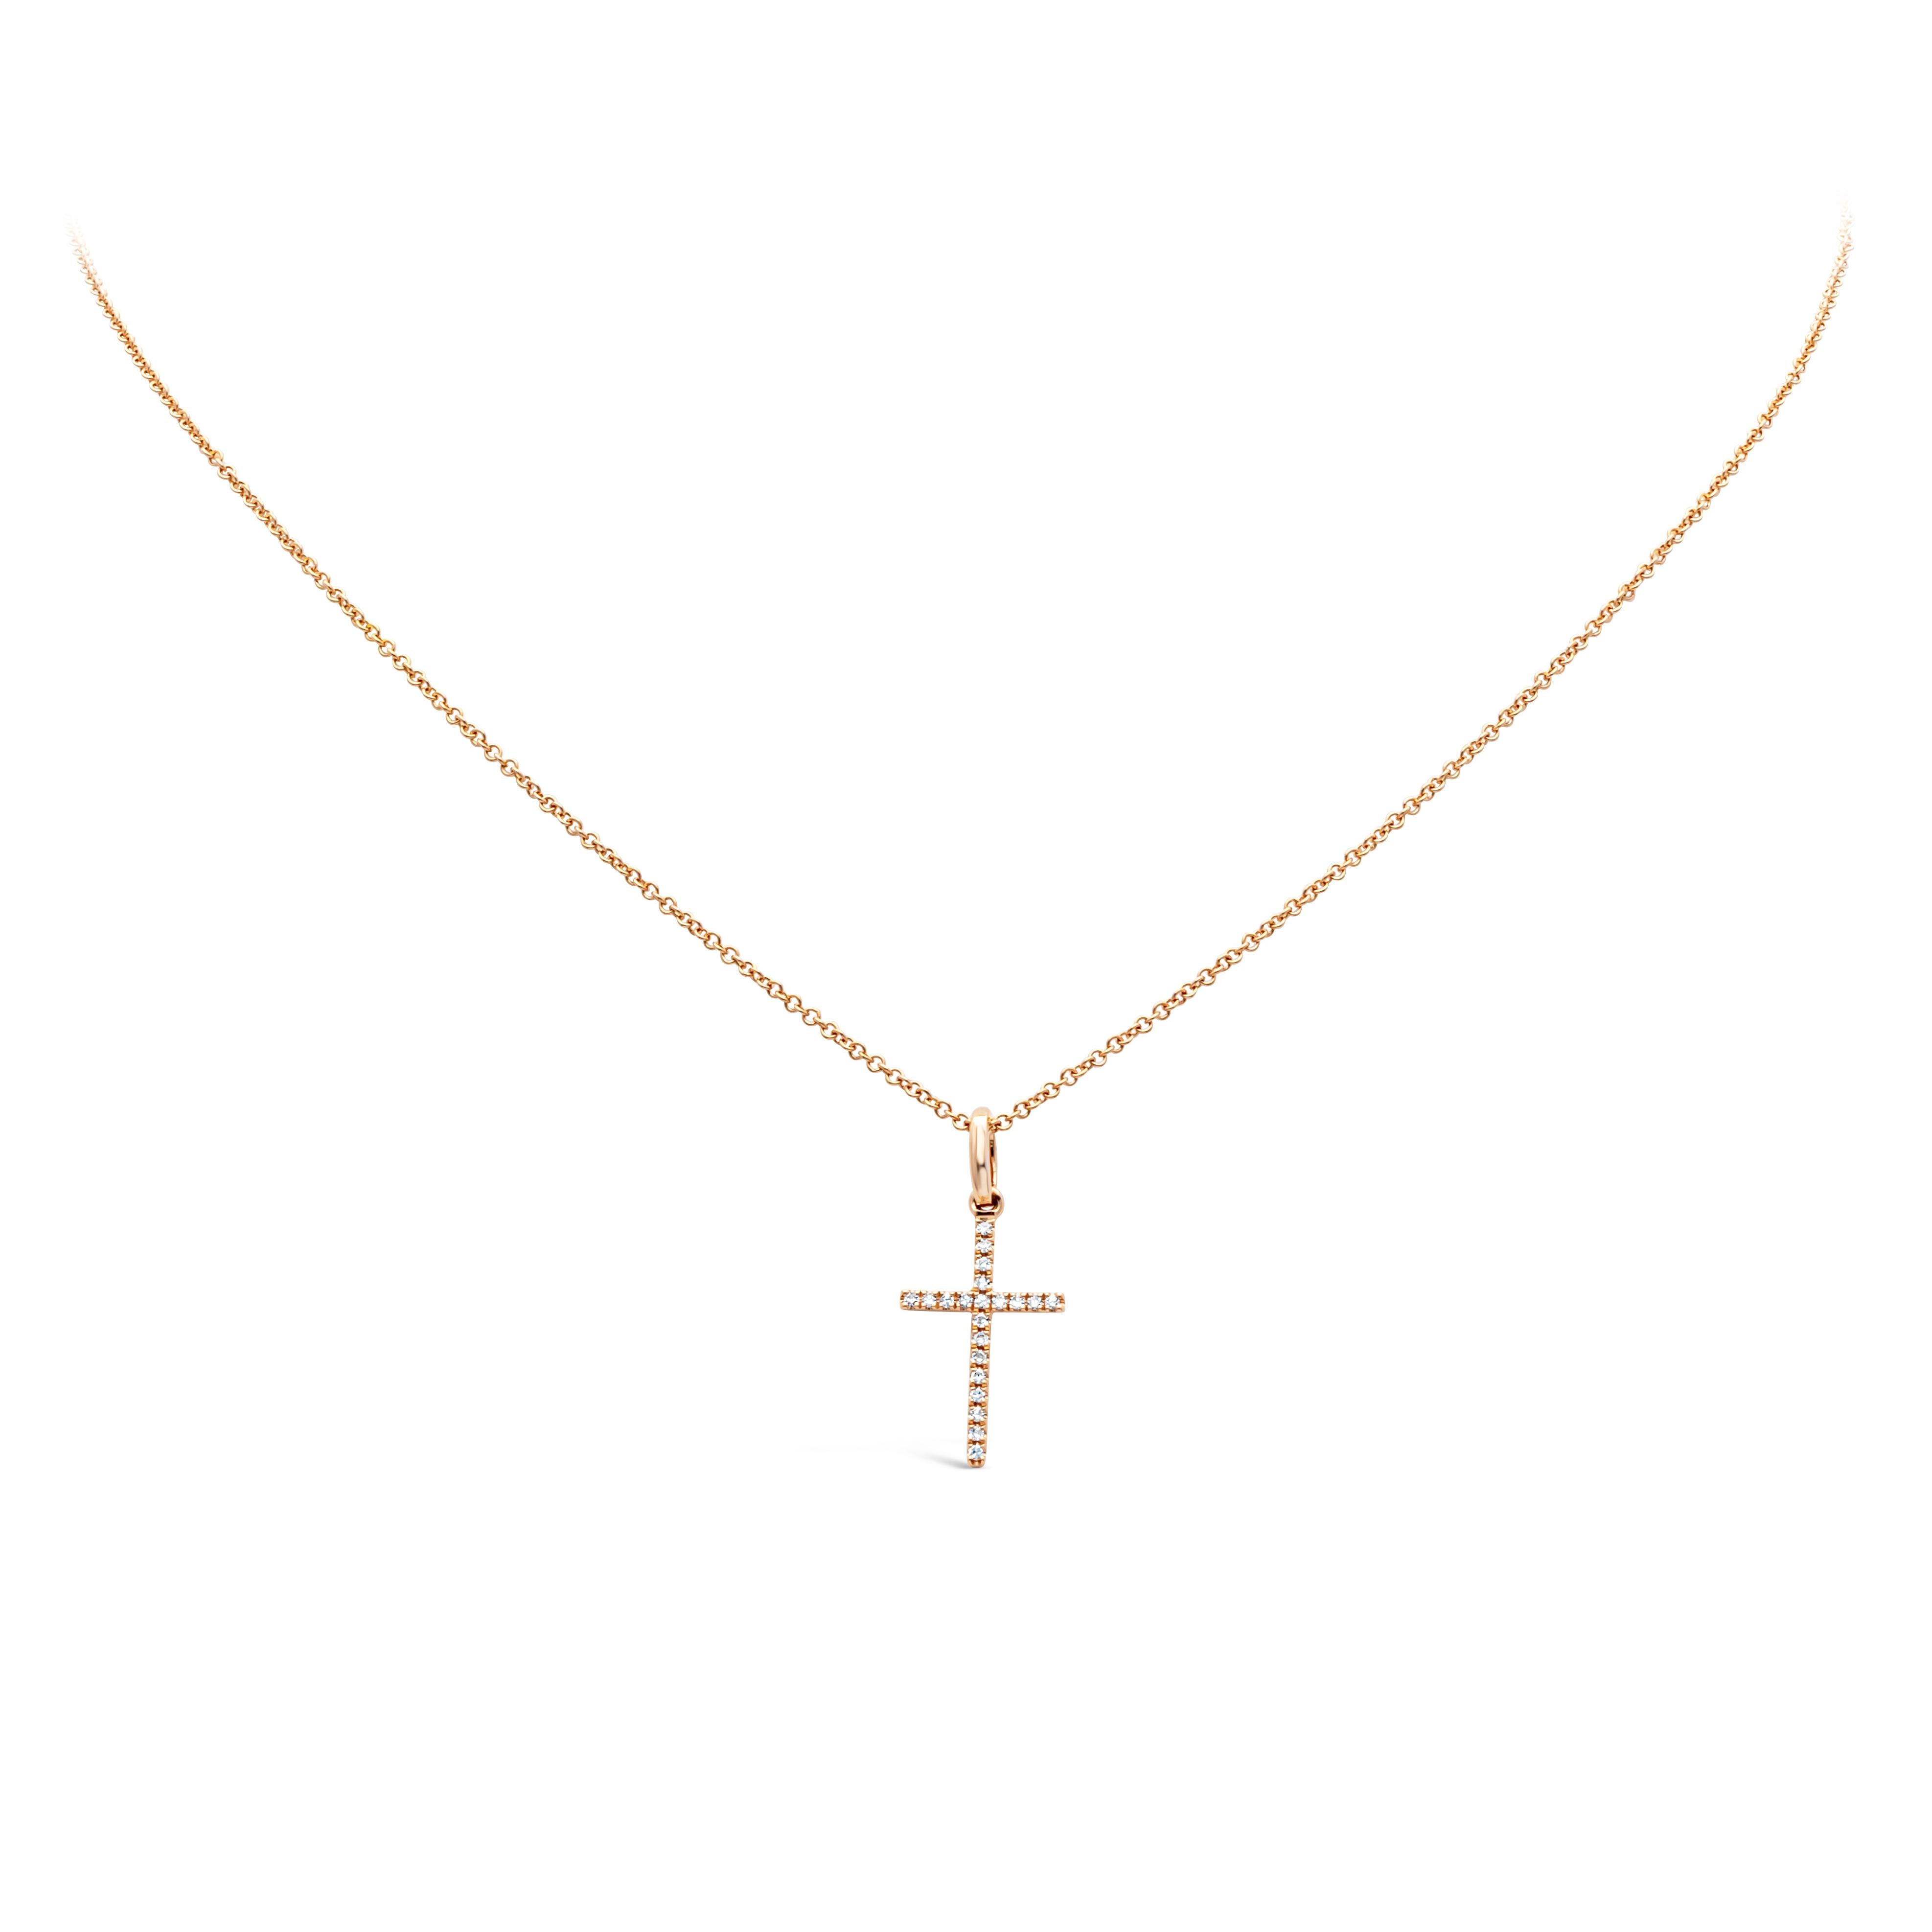 A small pendant necklace showcasing 0.06 carats total brilliant round diamonds, set in a religious cross design. Suspended in a 16 inch 18K Rose Gold chain. Perfect for your everyday use.

Roman Malakov is a custom house, specializing in creating